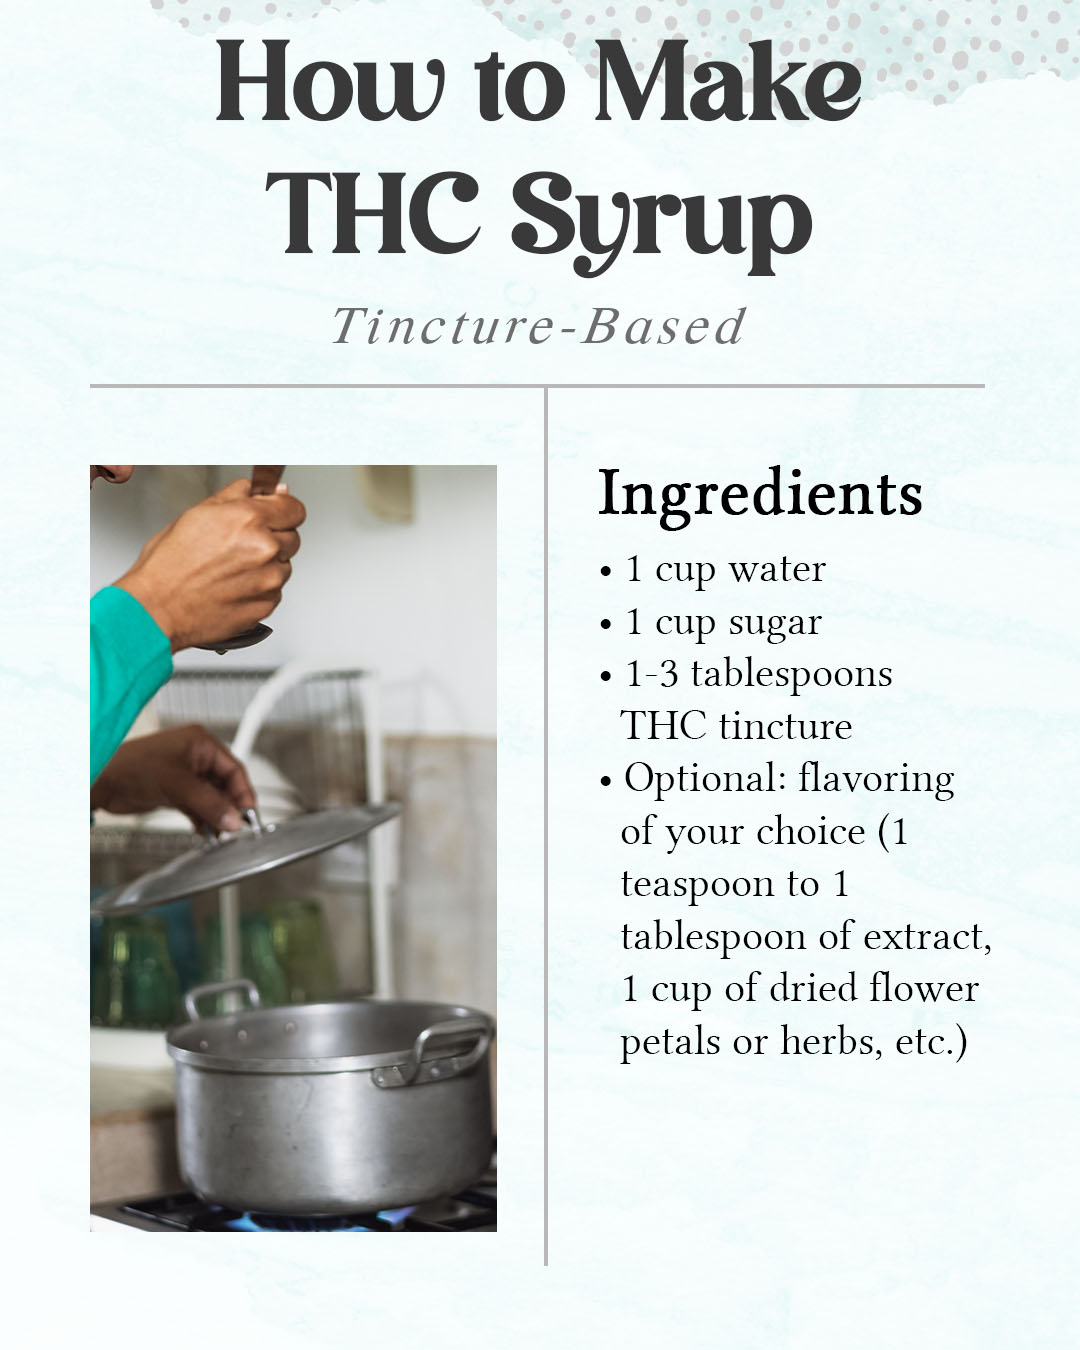 thc syrup ingredients_tincture